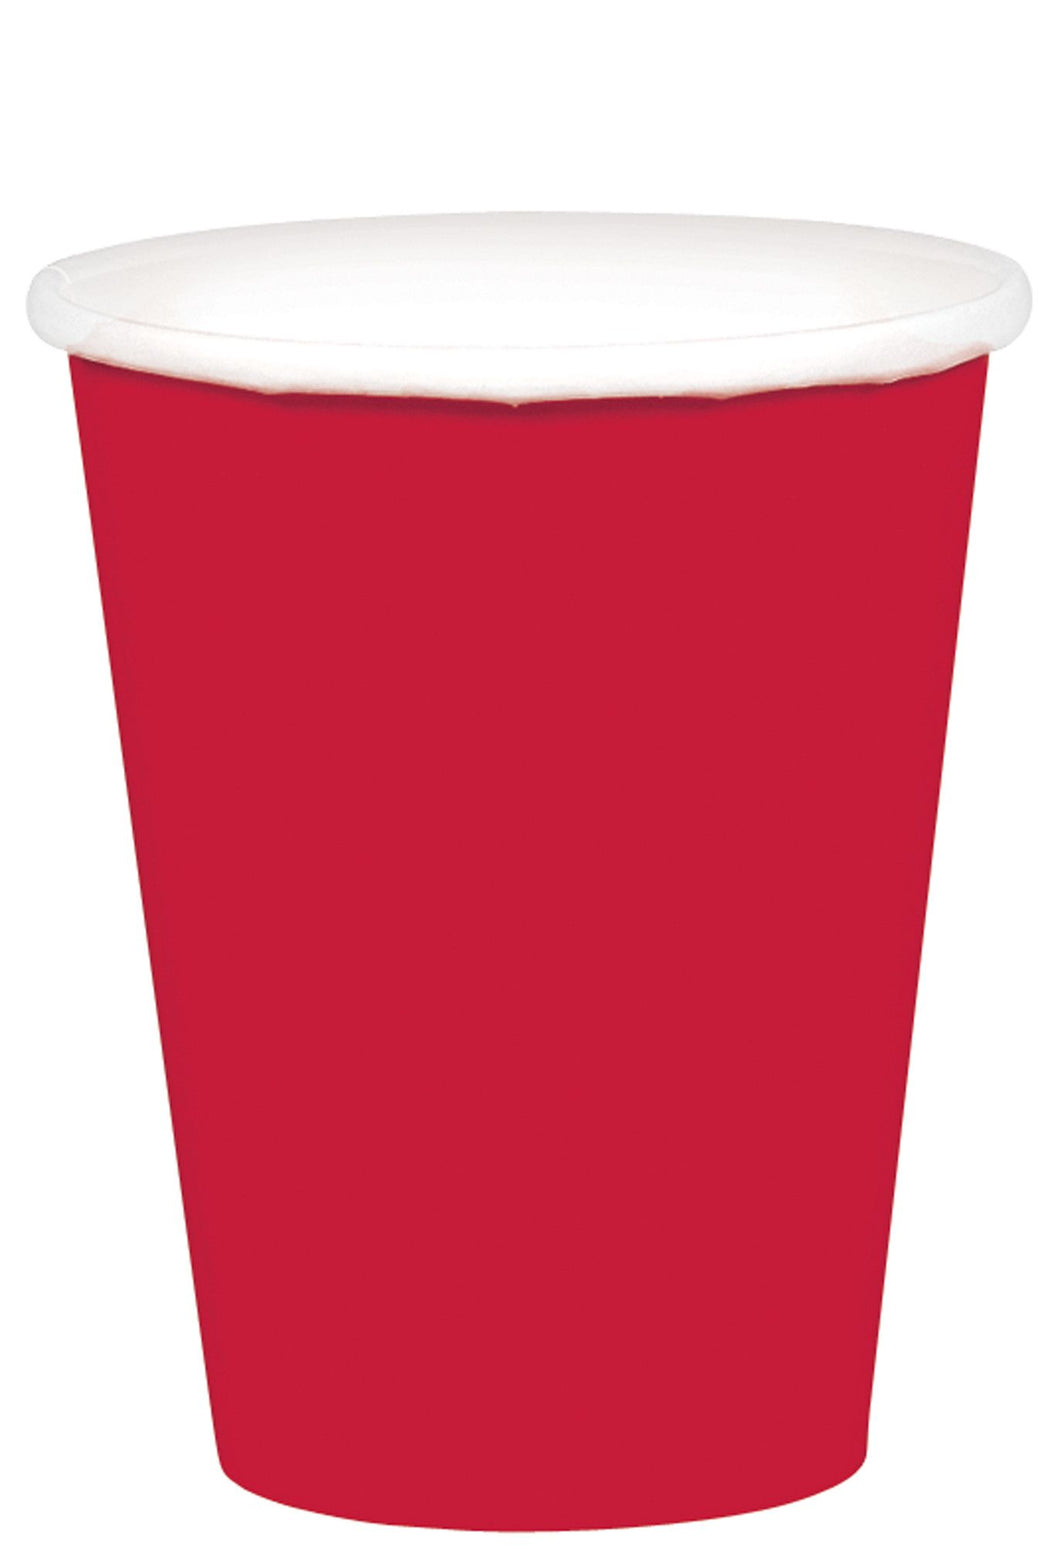 Red 9 oz. Paper Cups